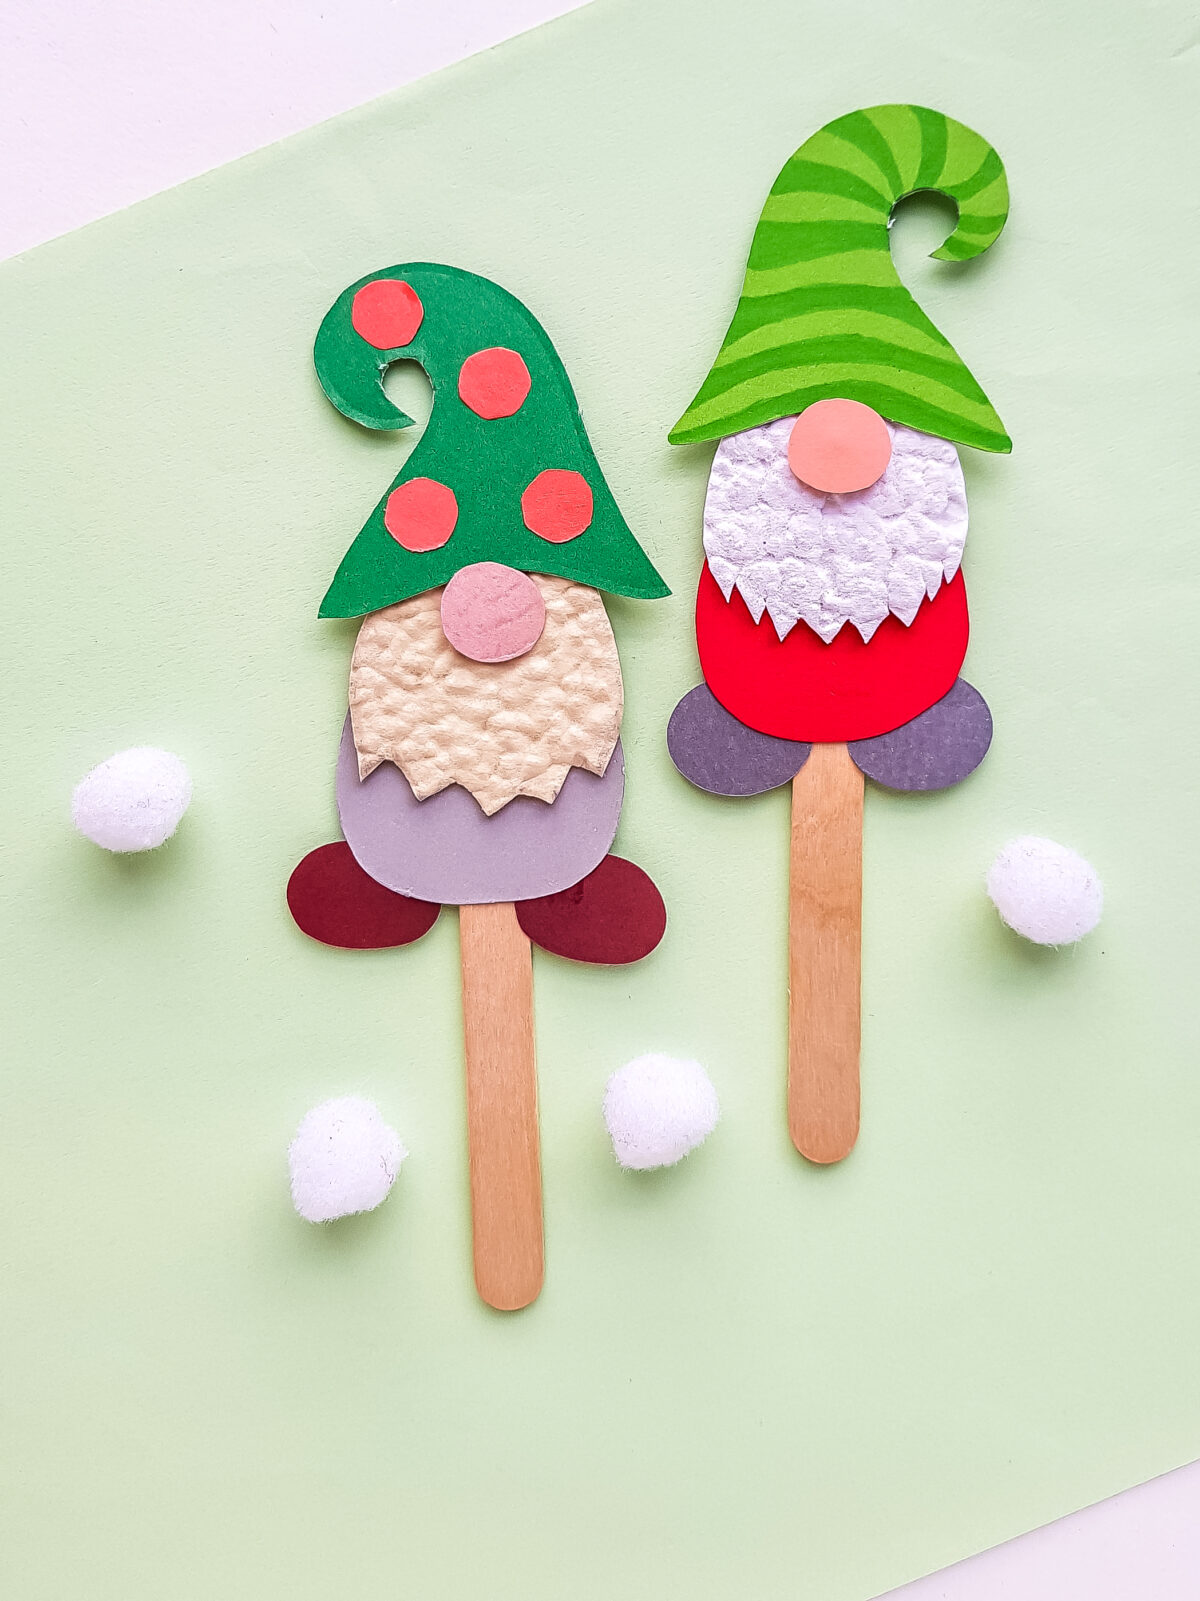 These cute little paper gnome puppets are very easy to make and a fun Christmas craft for kids. Free printable template included!